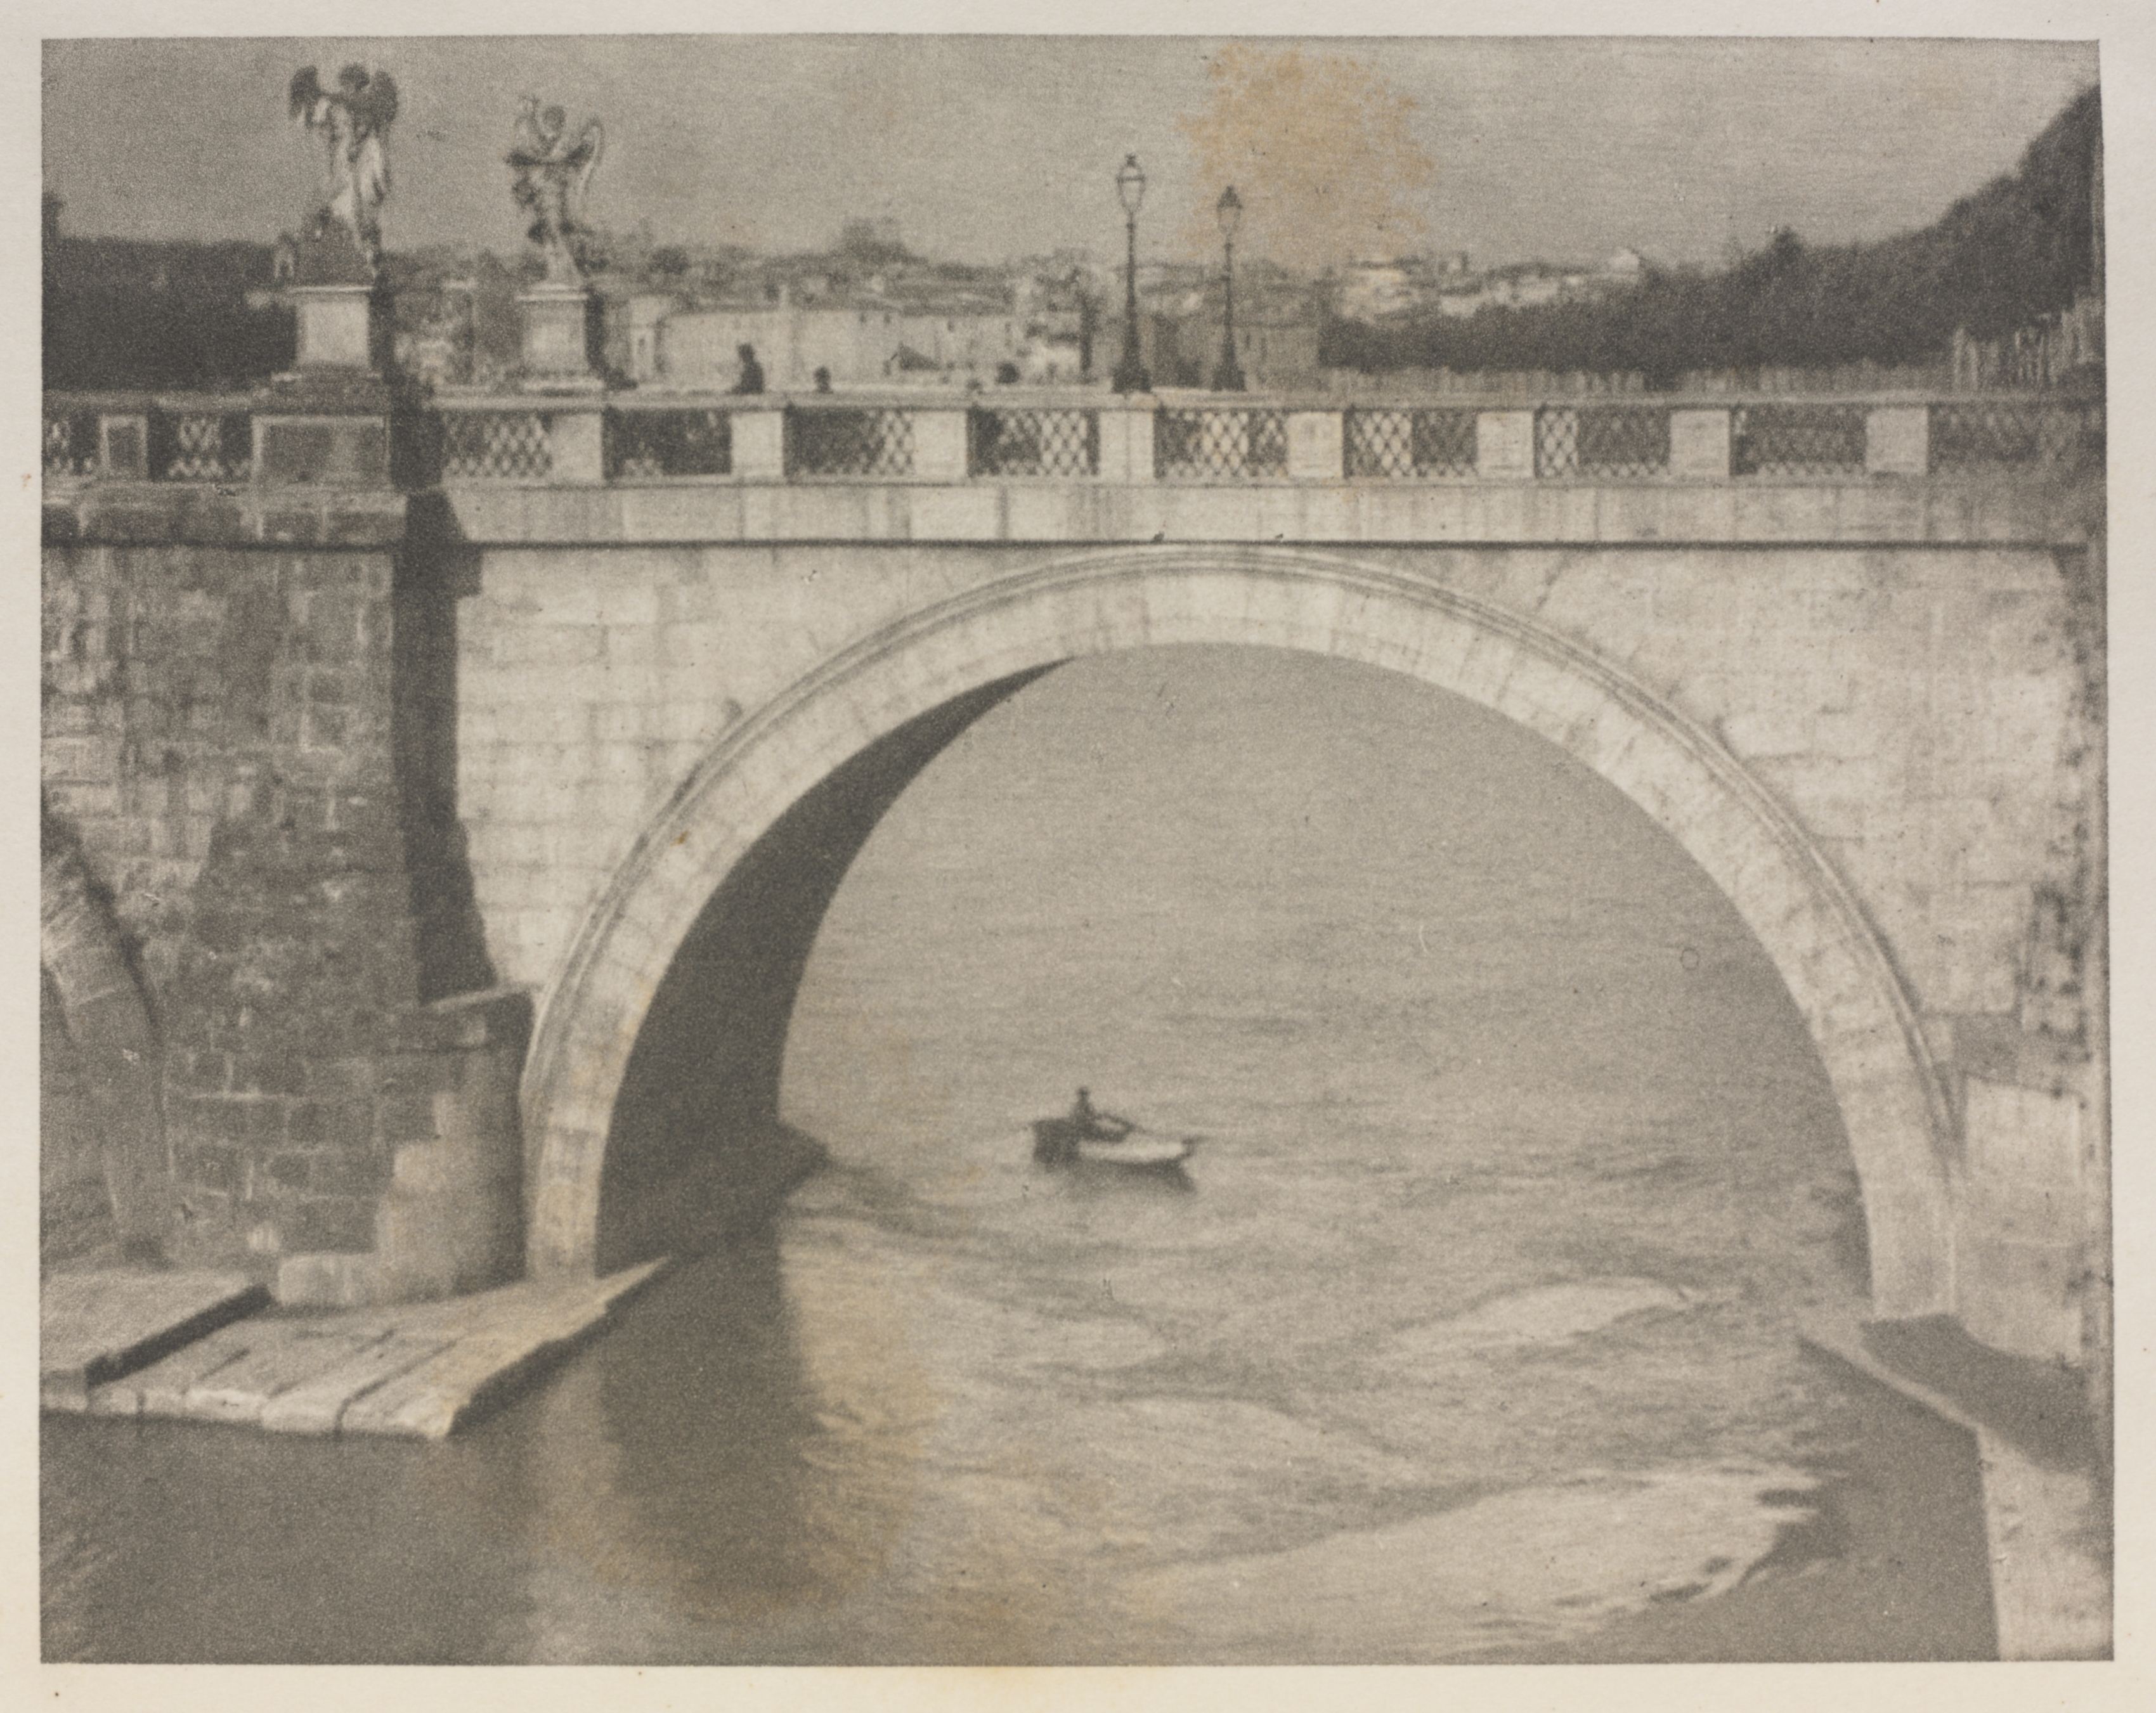 The Novels and Tales, by Henry James: The Roman Bridge